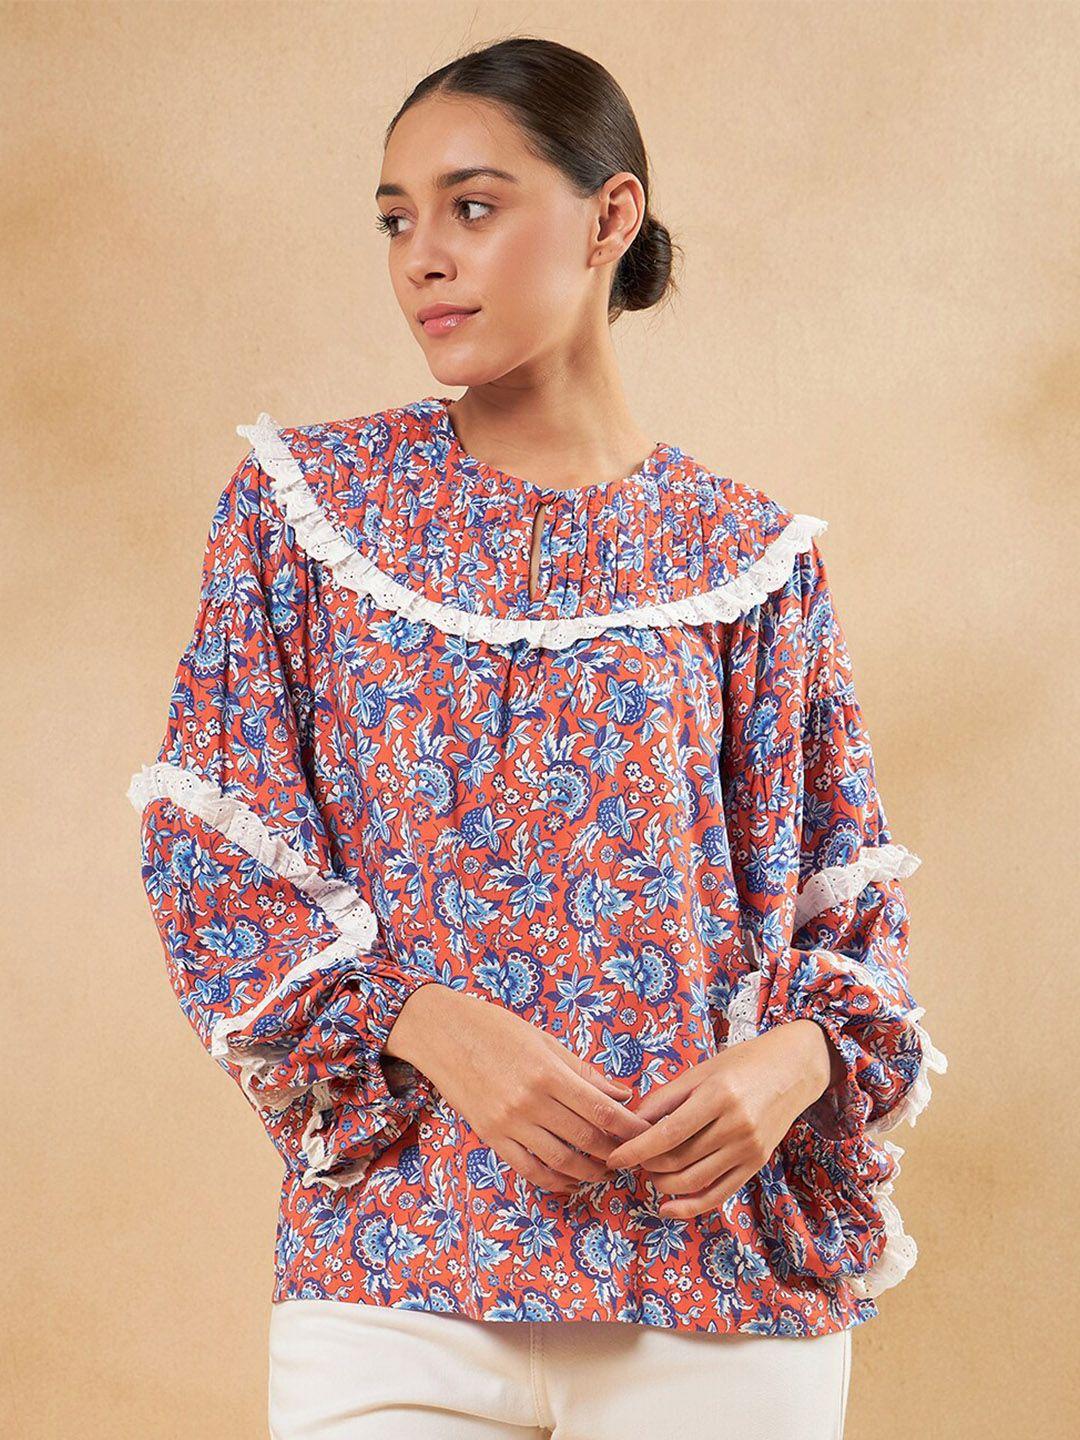 femella floral printed keyhole neck cuffed sleeves lace-up detail cotton a-line top